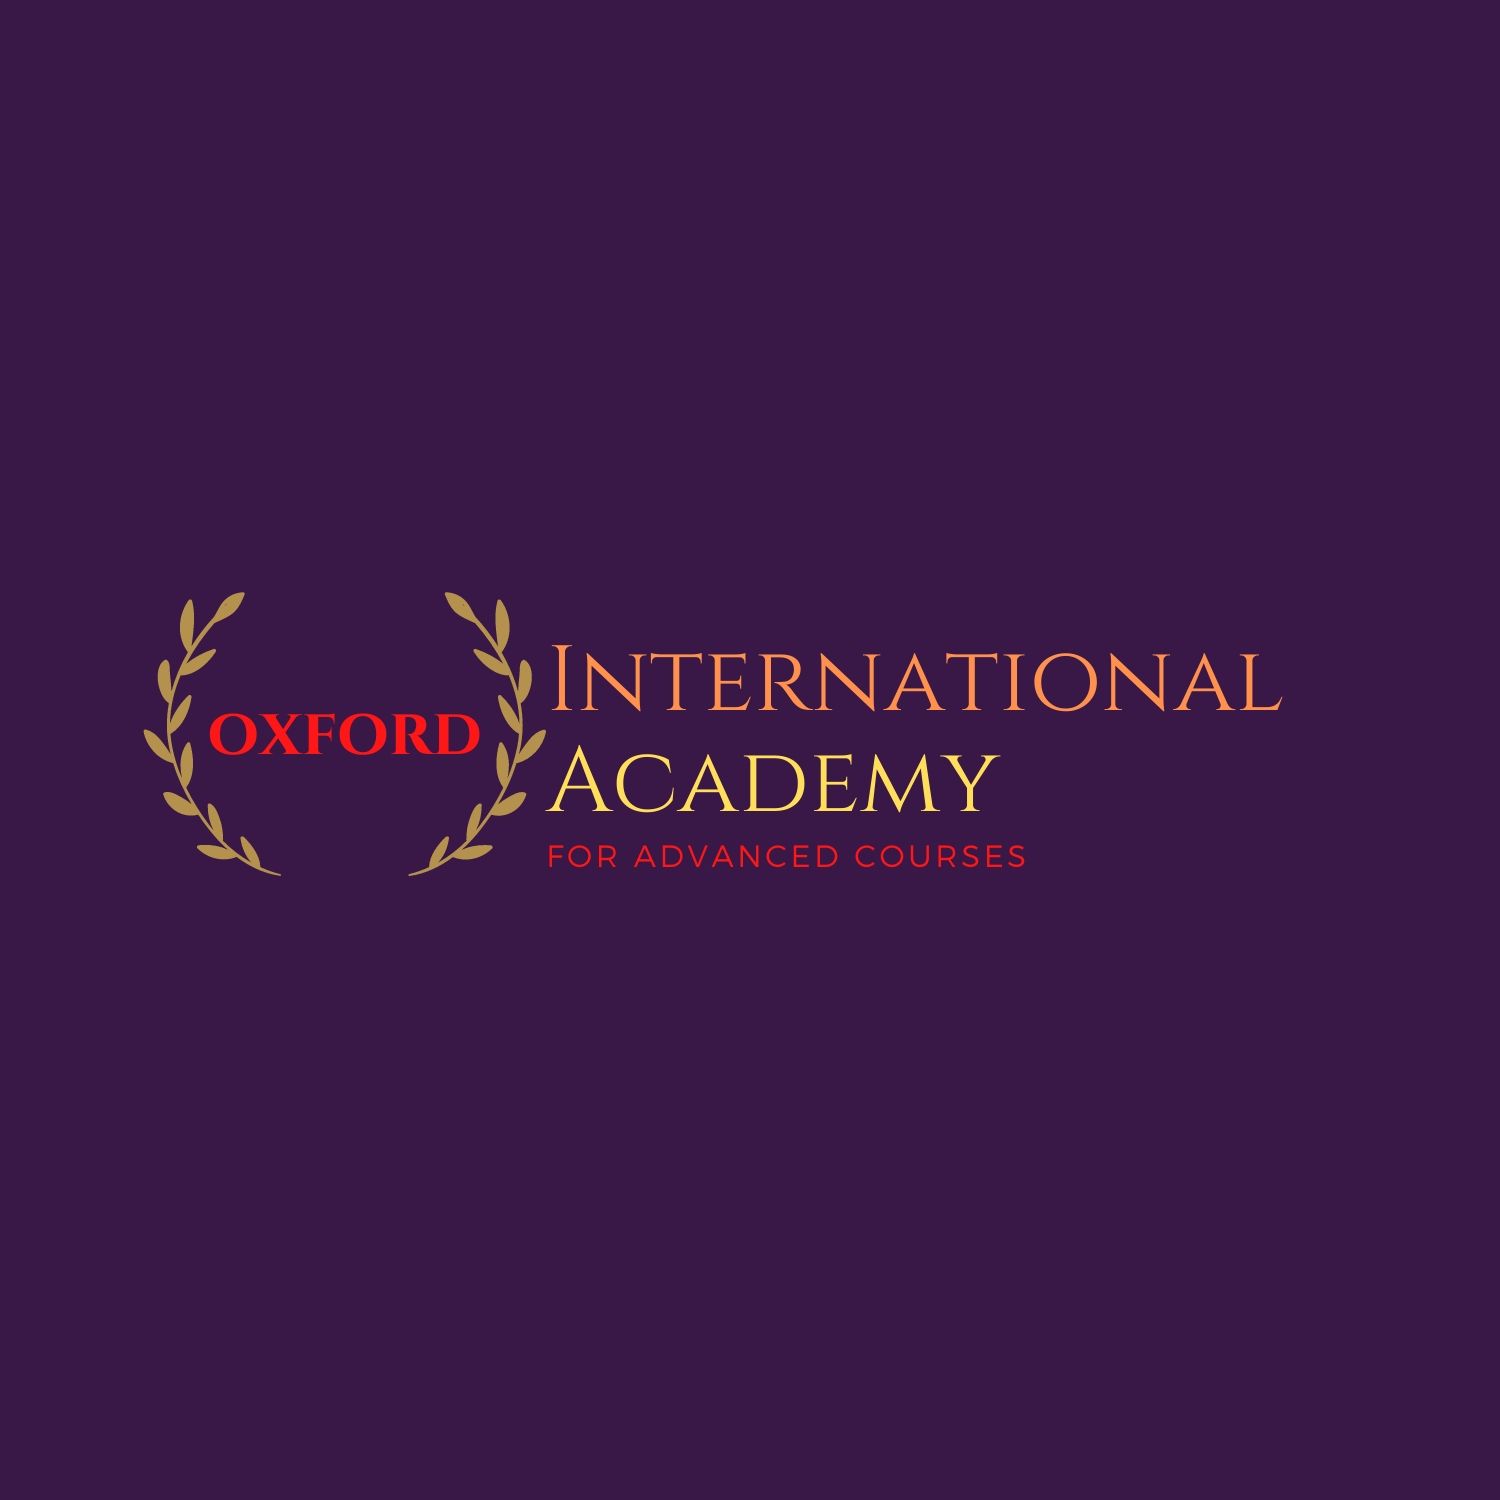 More about International Academy